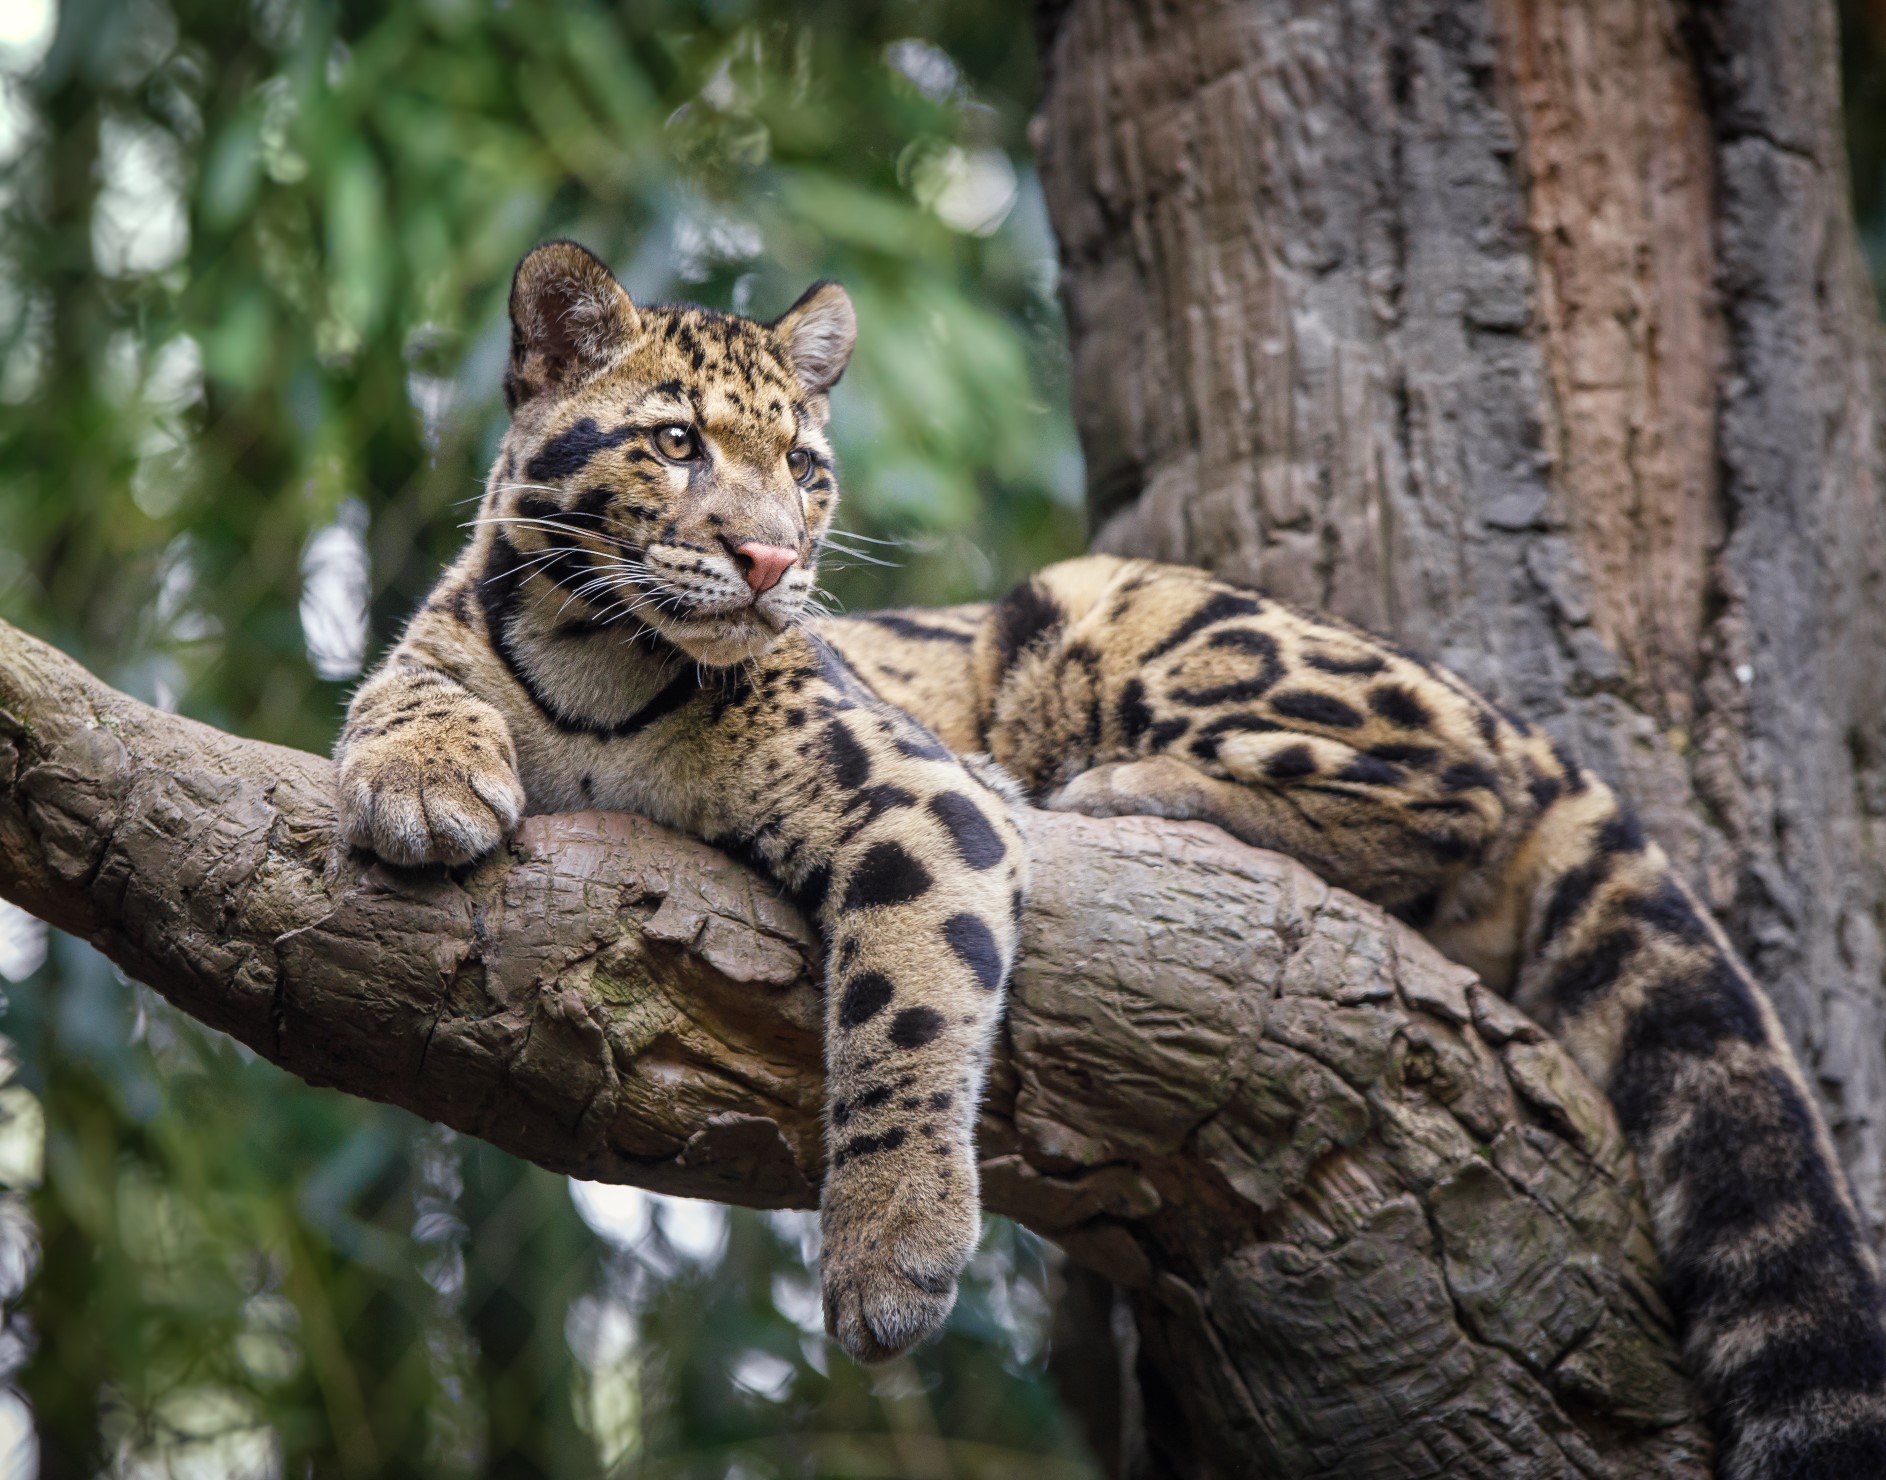 Although leopards (Panthera pardus) are known to hoist their kill into trees to avoid the prying eyes of hyenas and lions, their arboreal skills are nothing when compared to clouded leopards (Neofelis nebulosa) native to Asian jungles.